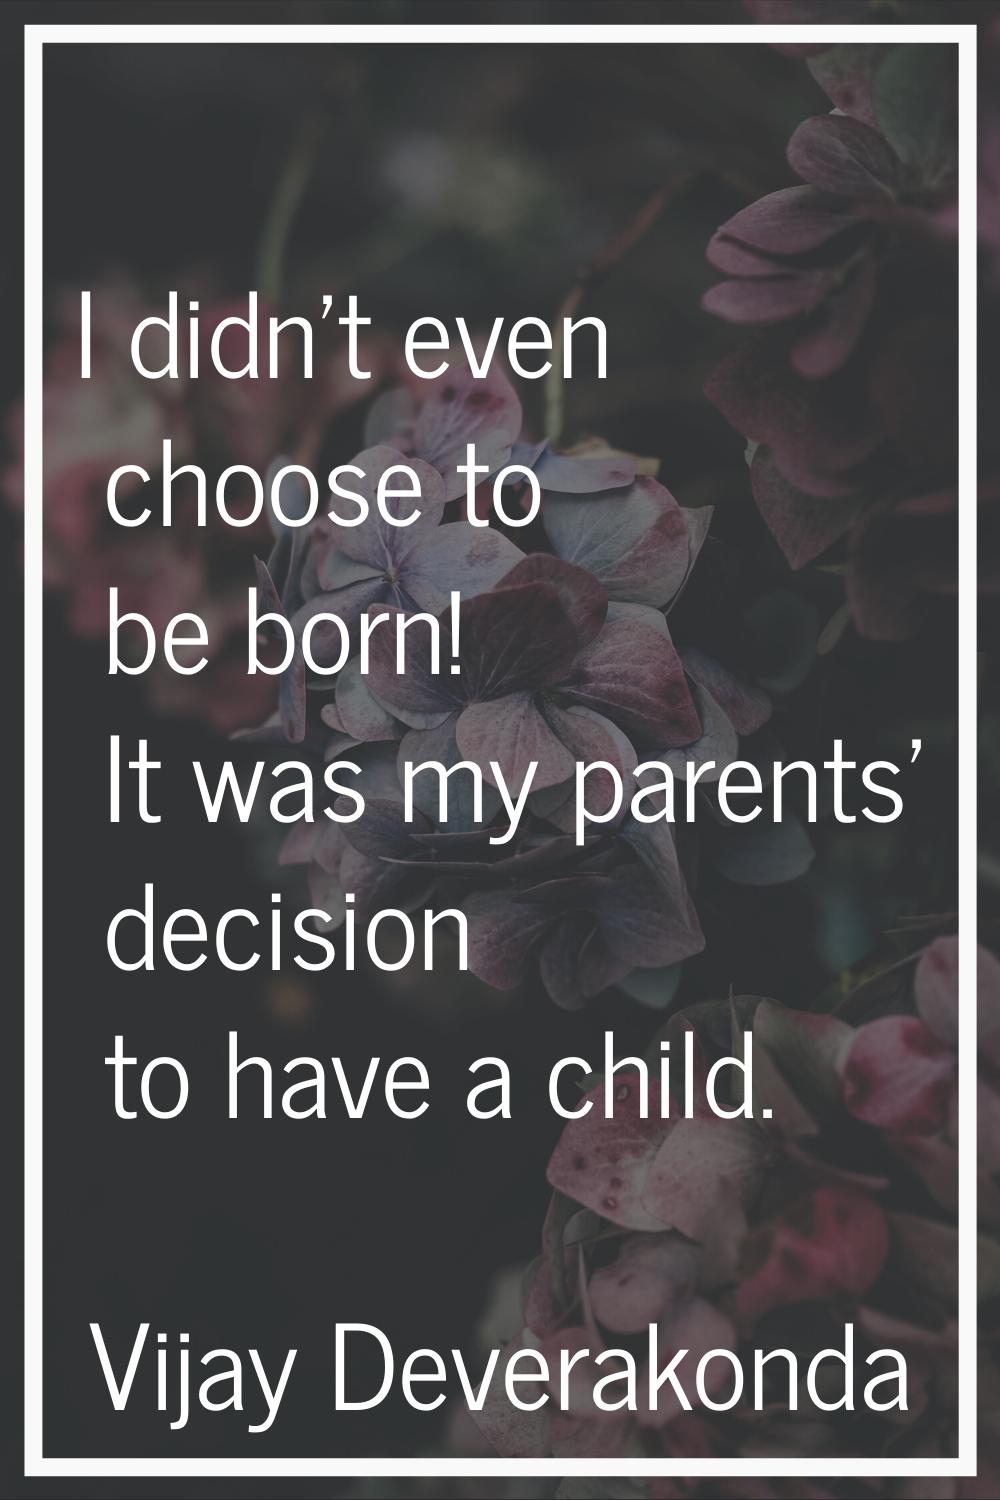 I didn't even choose to be born! It was my parents' decision to have a child.